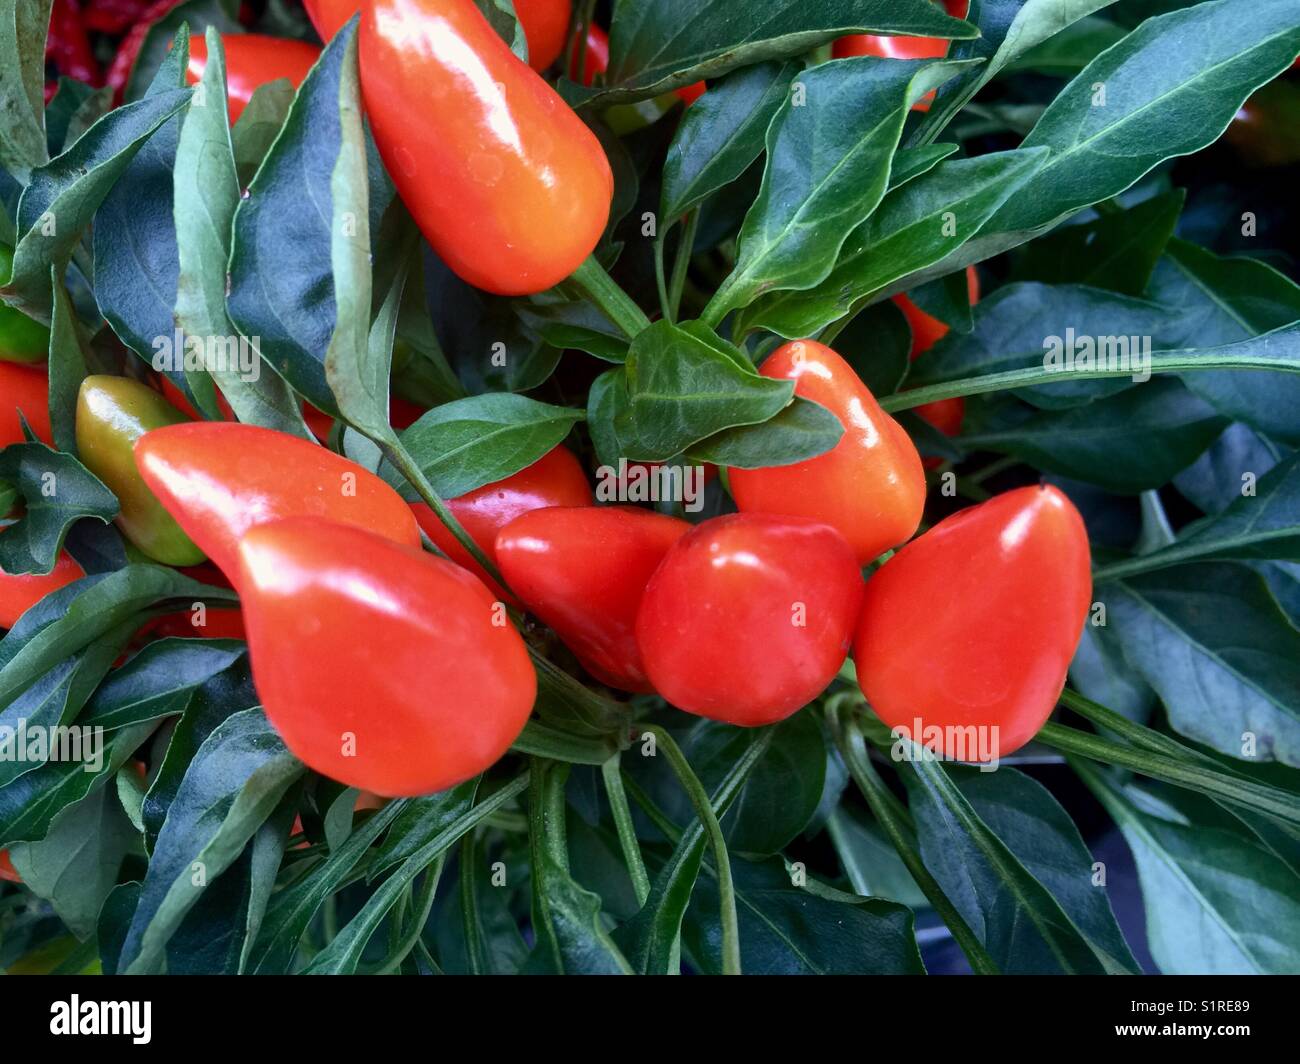 Large red elongated ornamental peppers Stock Photo